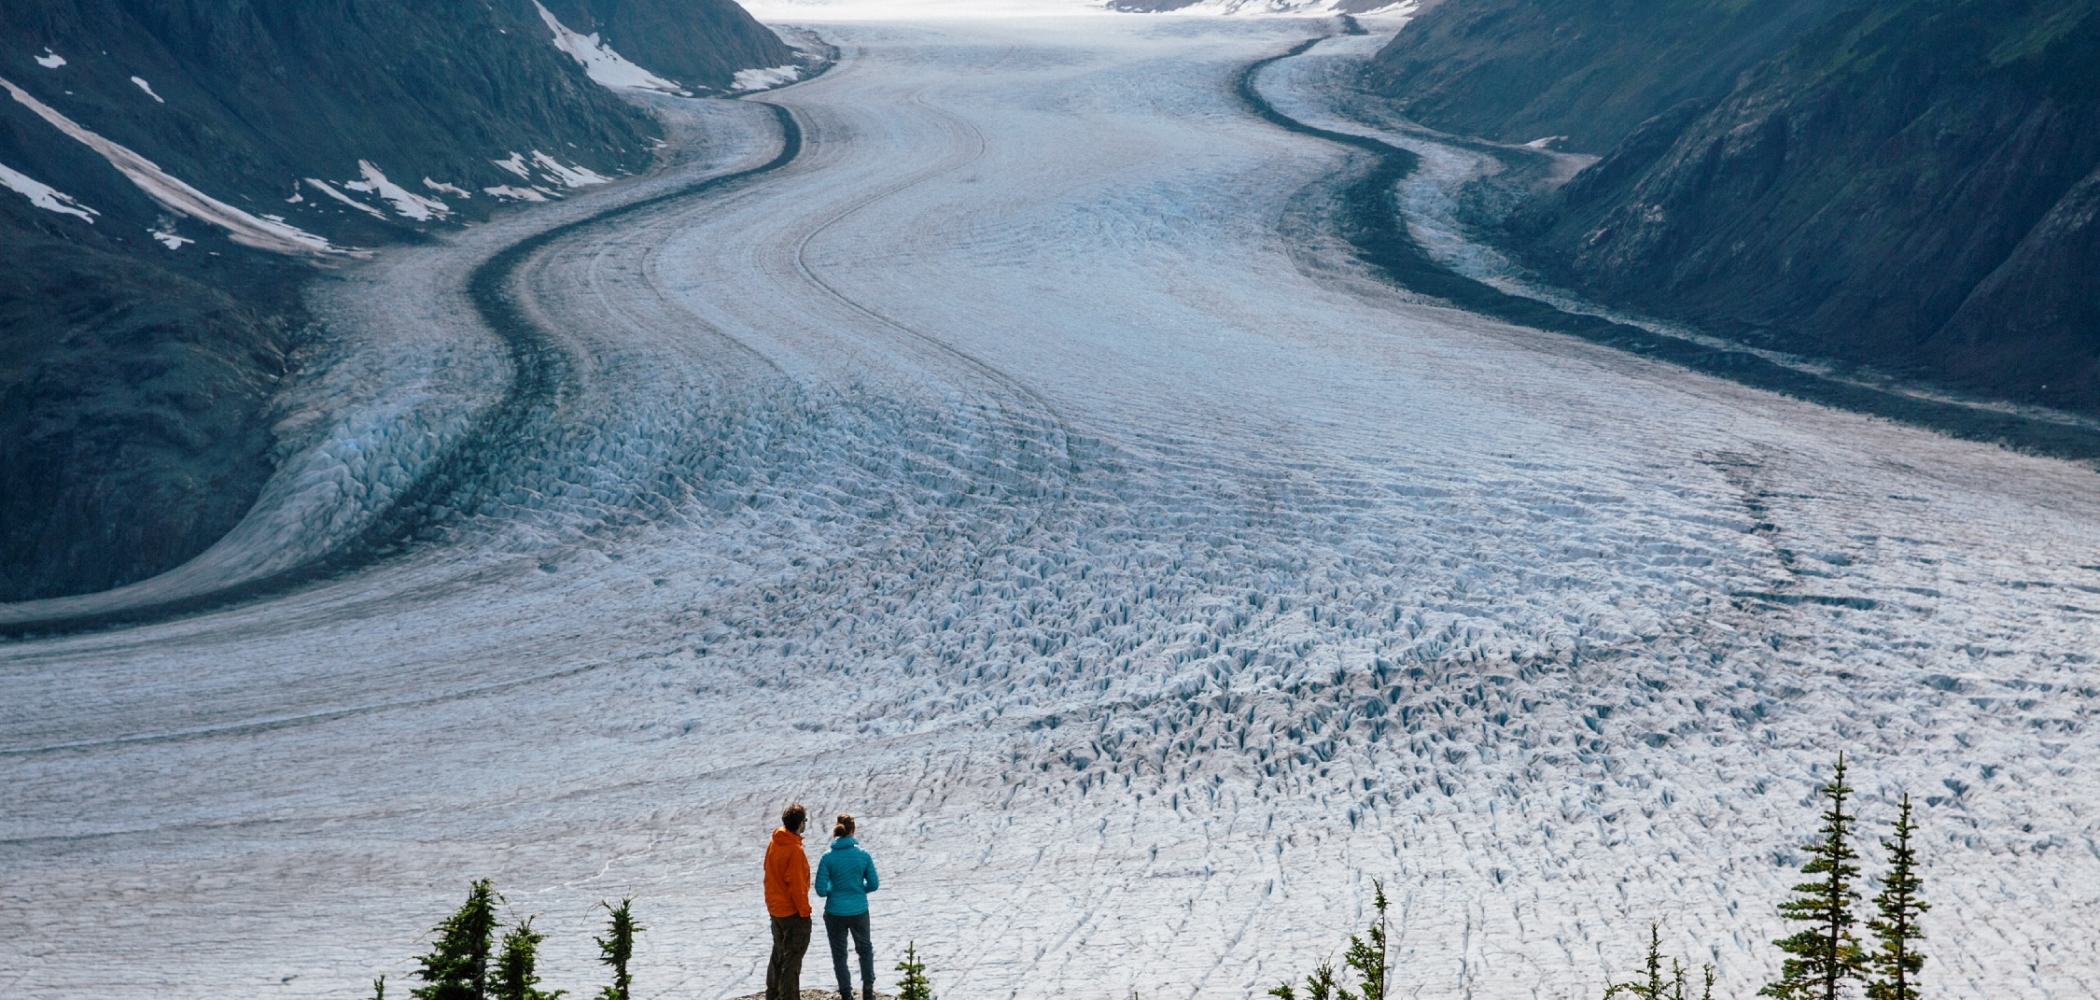 Two people look out at a frozen landscape in the Stewart-Cassiar region of northern BC. They stand on a rocky outcrop and are looking towards the mountain range.